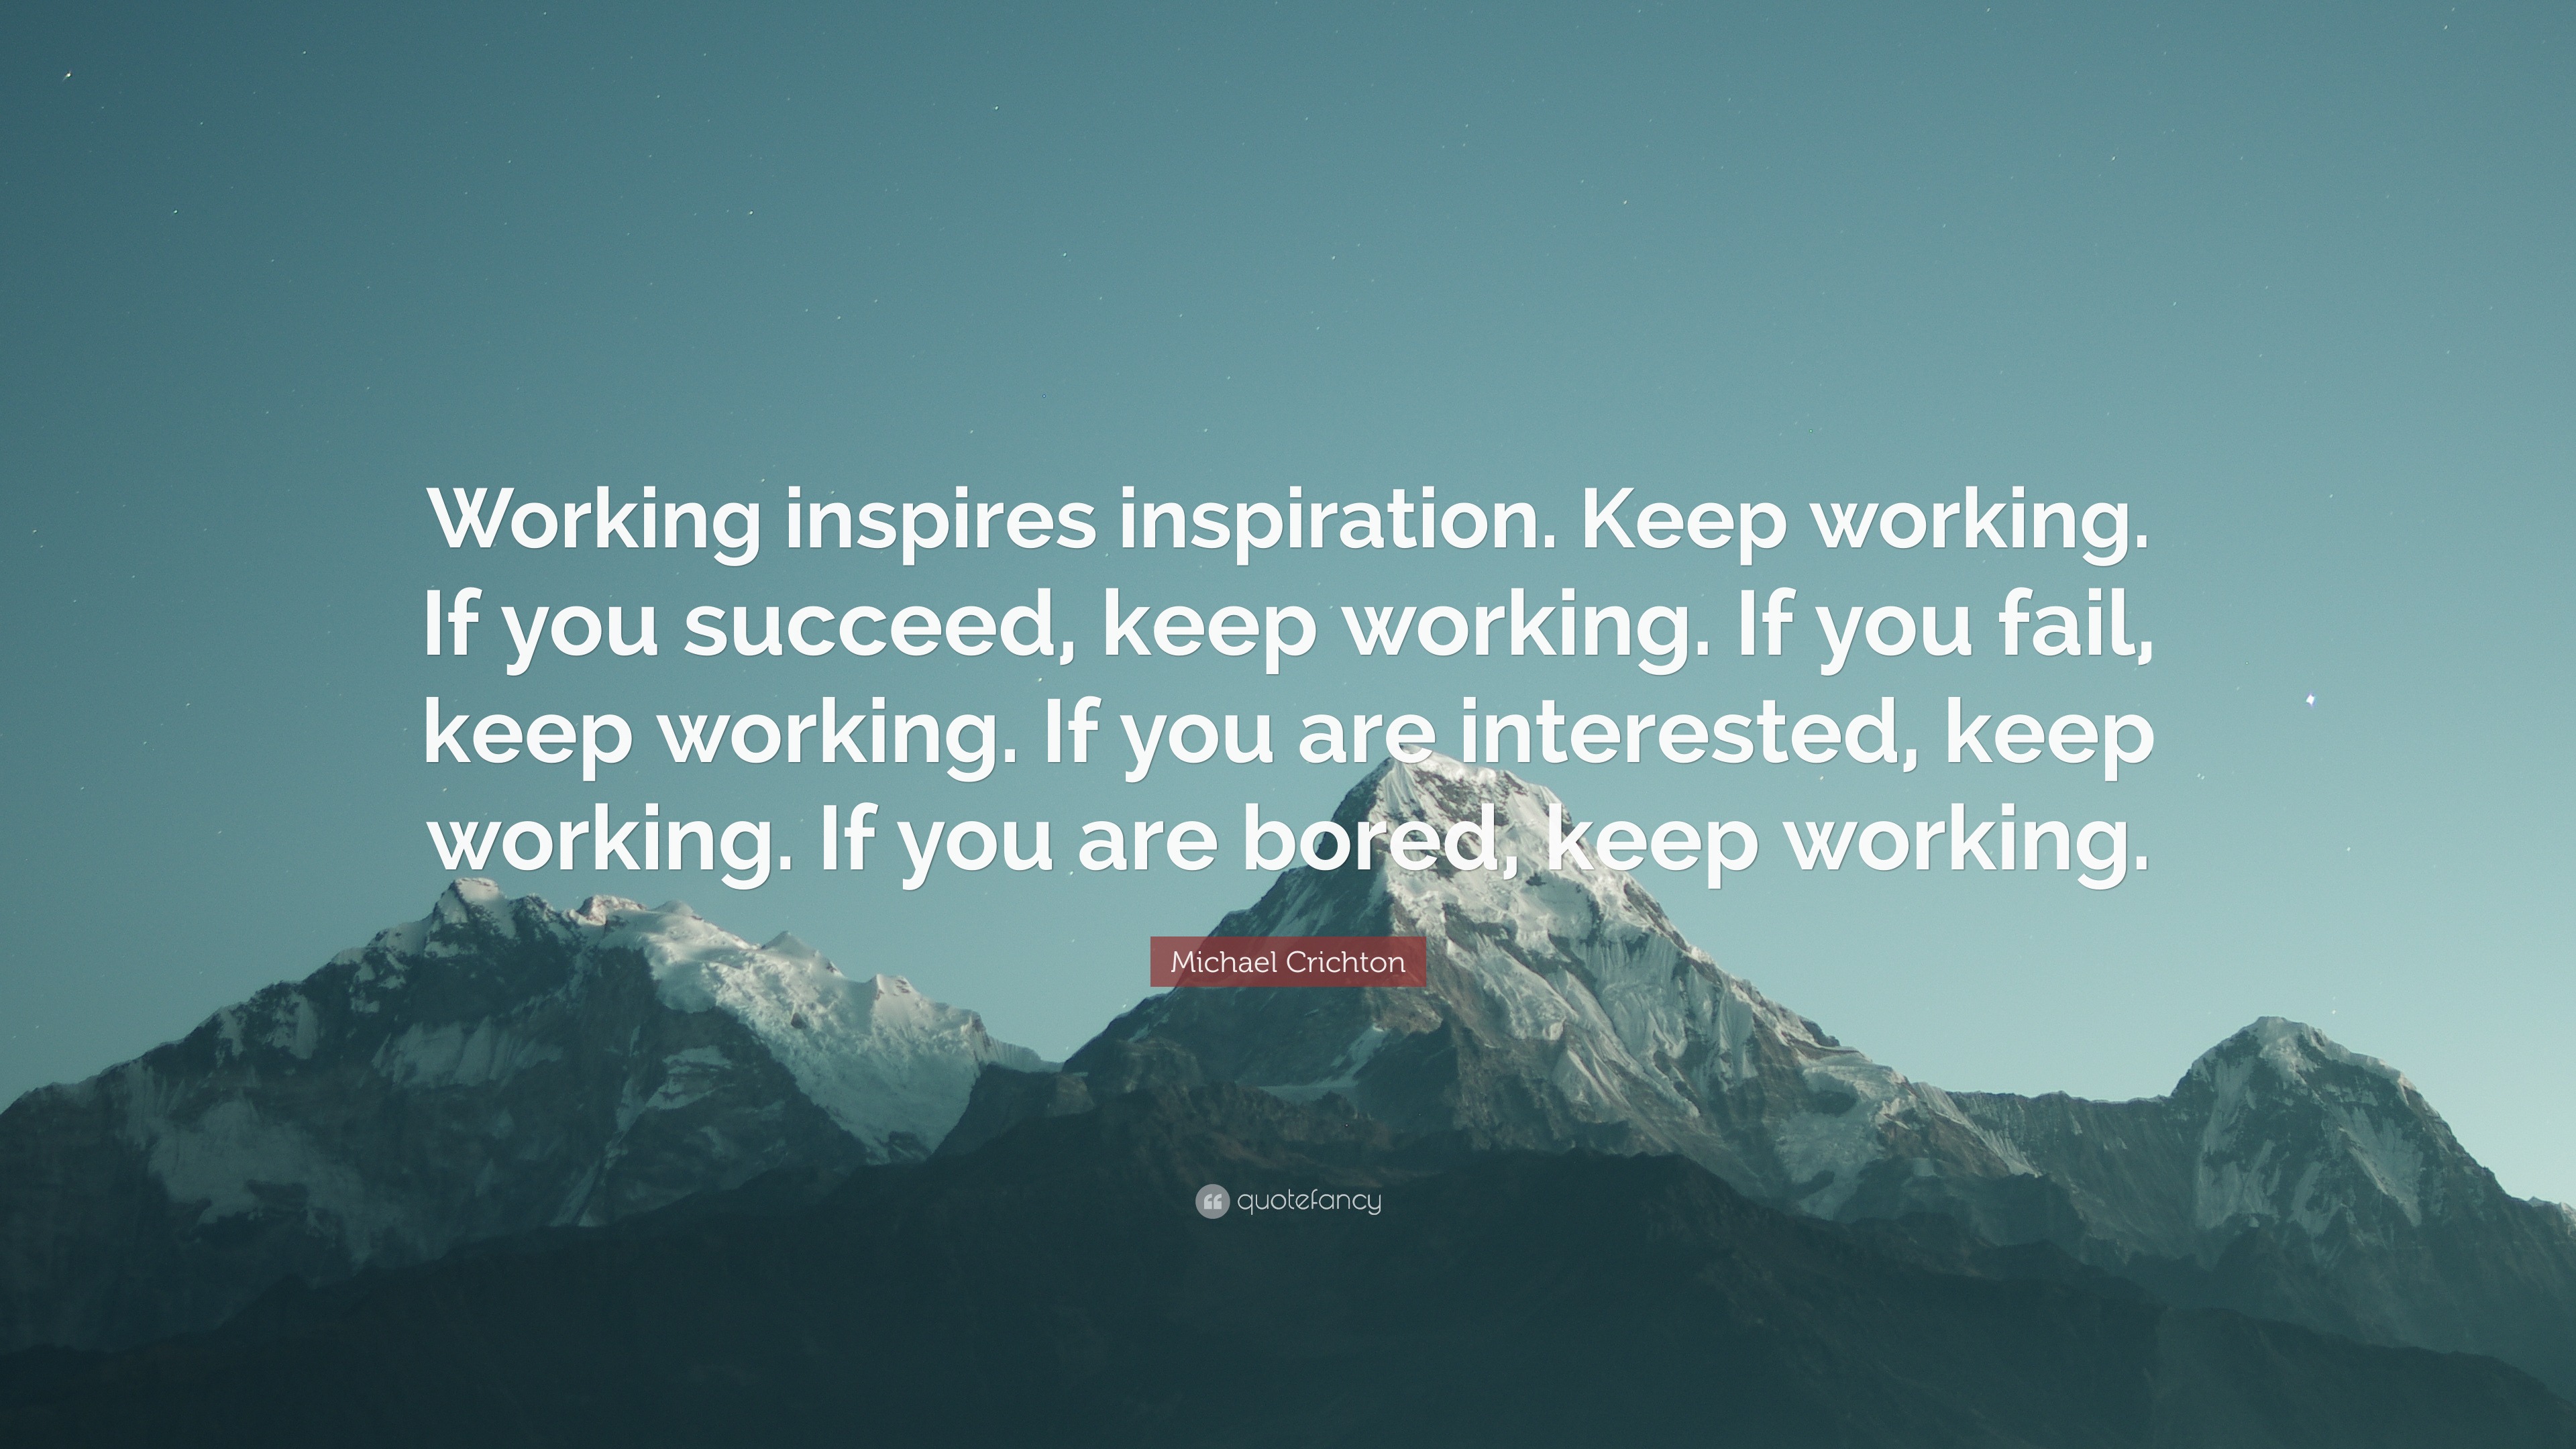 Michael Crichton Quote: “Working inspires inspiration. Keep working. If